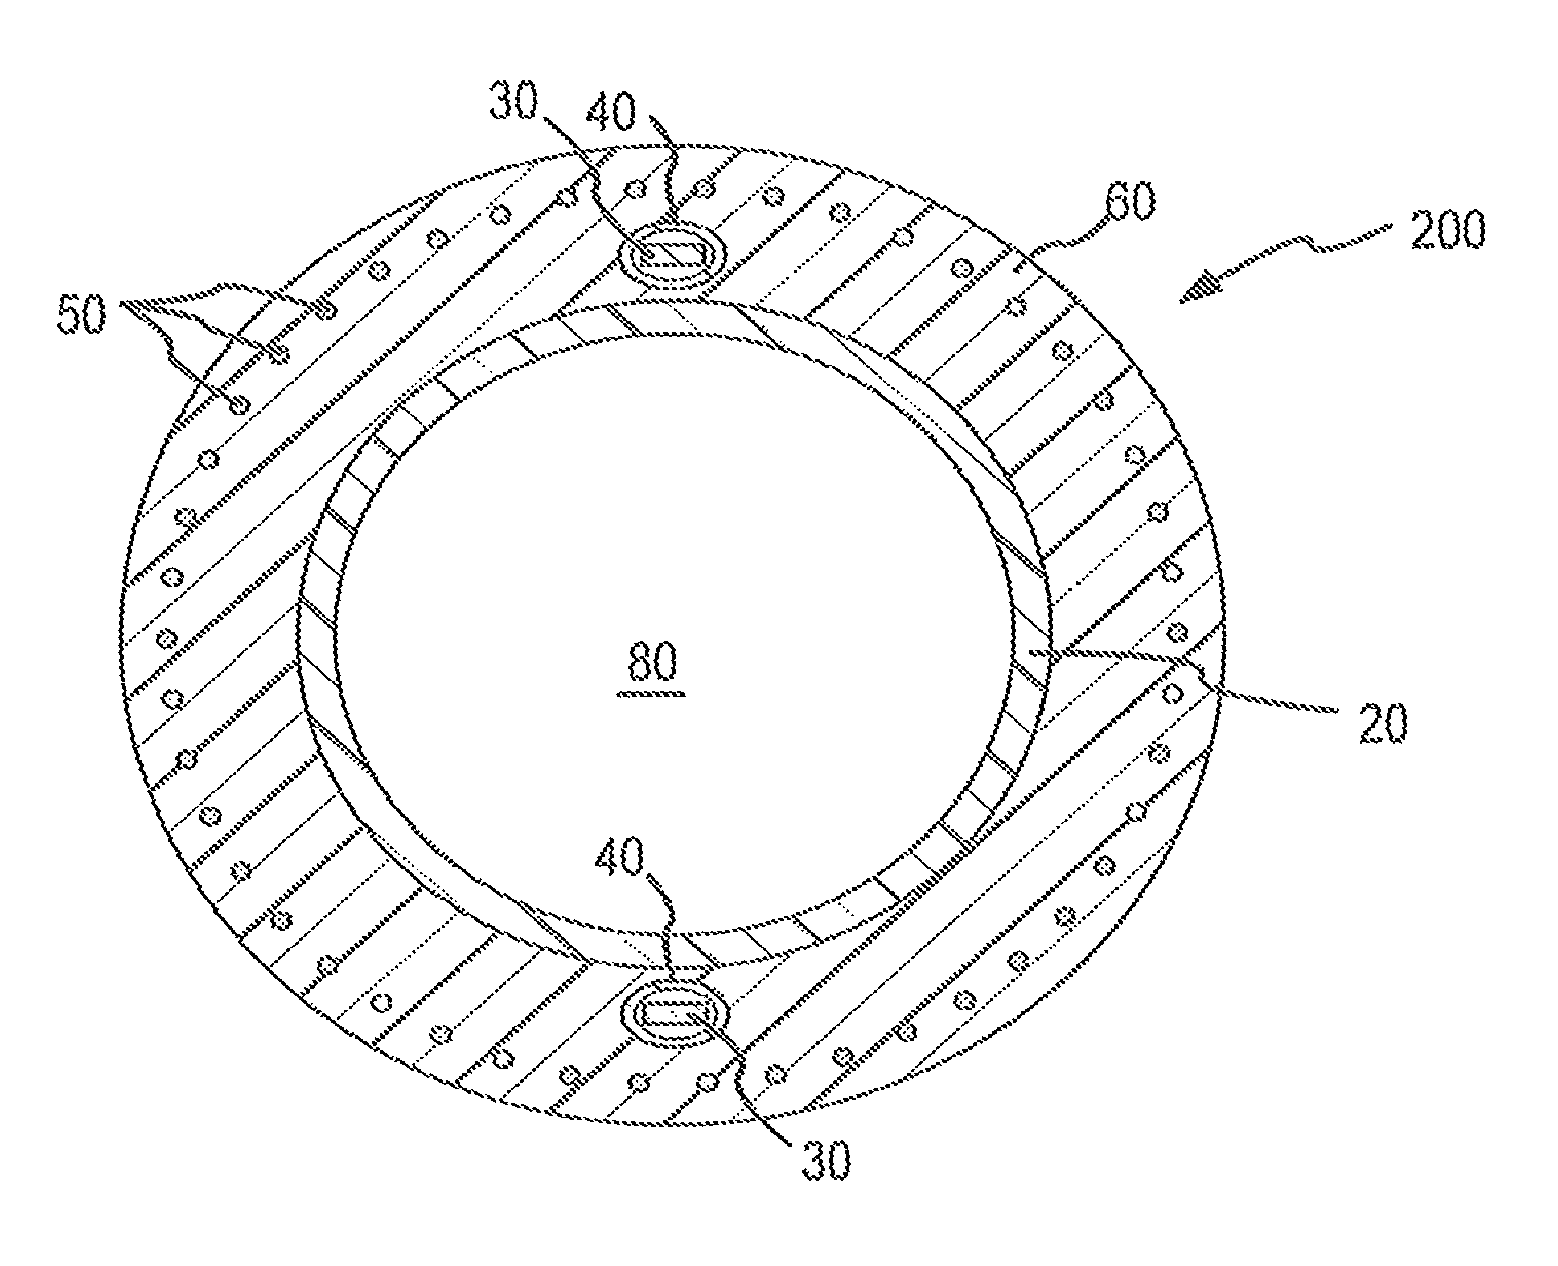 Steerable catheter using flat pull wires and having torque transfer layer made of braided flat wires